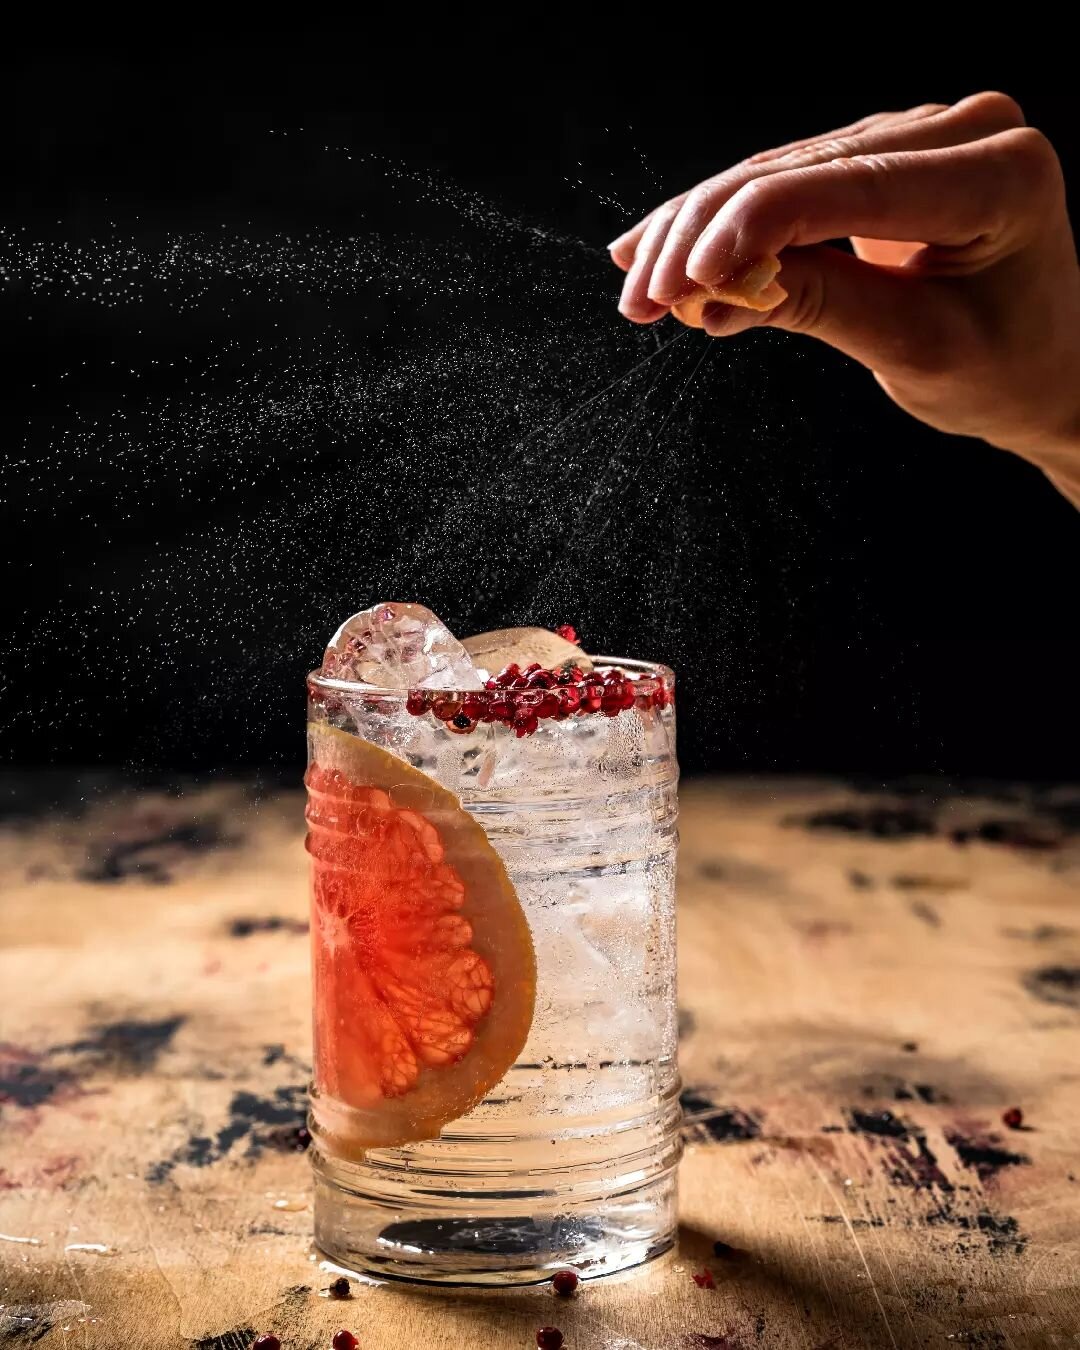 Happy World Gin Day!&nbsp;🍸
​
Oh, and it's Saturday. Even more reason to celebrate!&nbsp;✨
​
​At The Bucket Bar, our mixologists will mix and serve delicious, refreshing gin tonics.&nbsp;
​Do you prefer a good cold beer? Or are you a wine-lover? We 